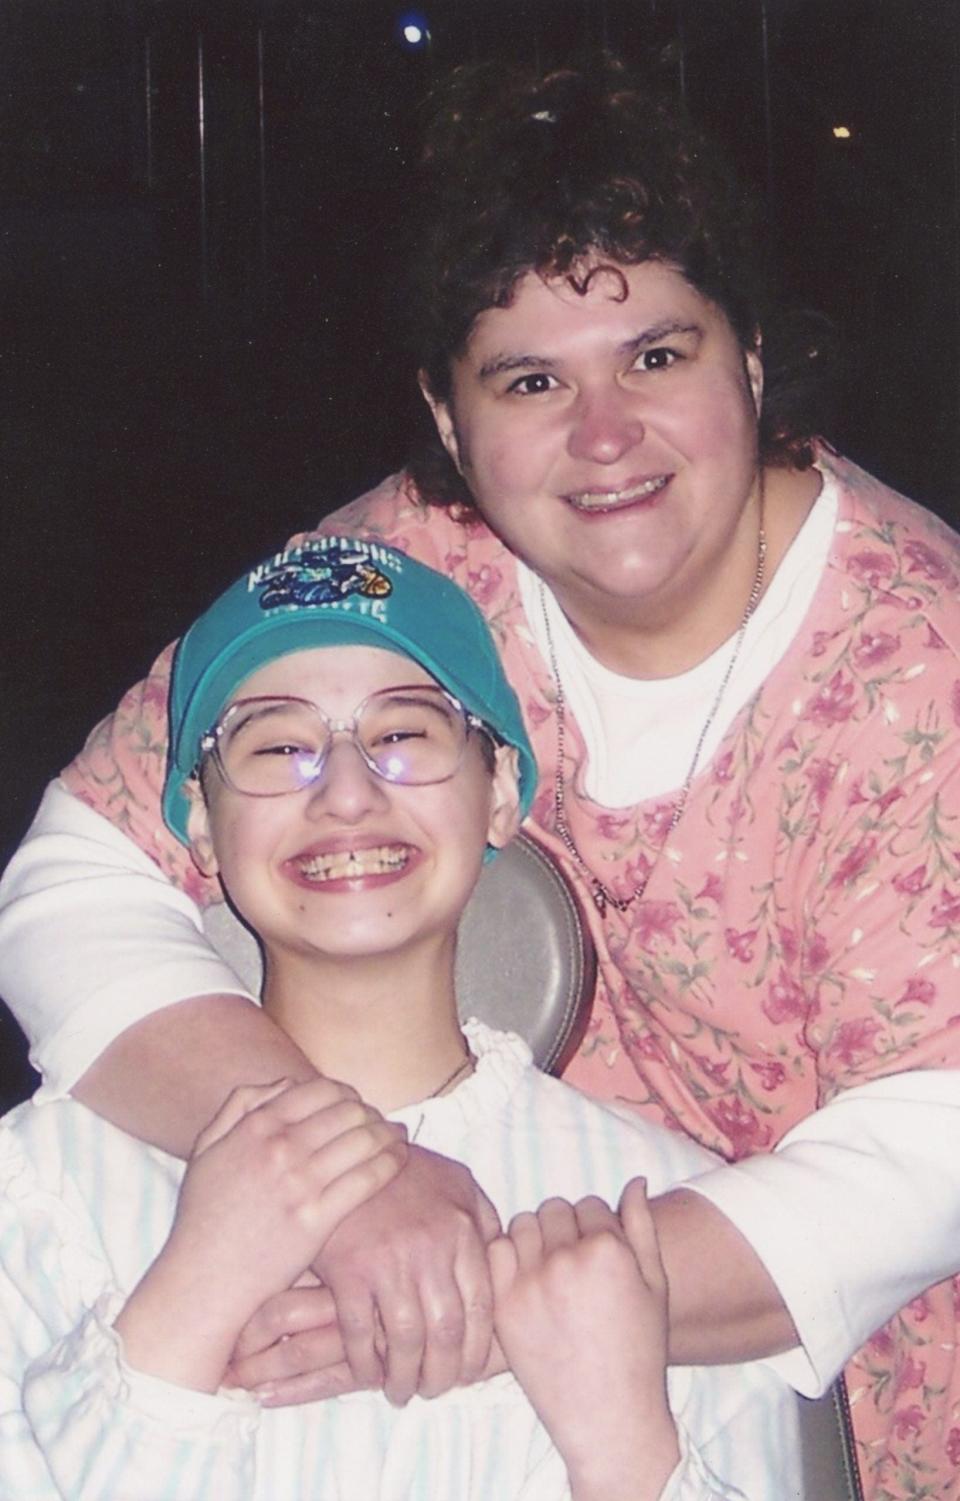 dee dee blanchard holding her arms around gypsy rose blanchard, who is smiling widely, sitting in a chair, and wearing a hat on her head